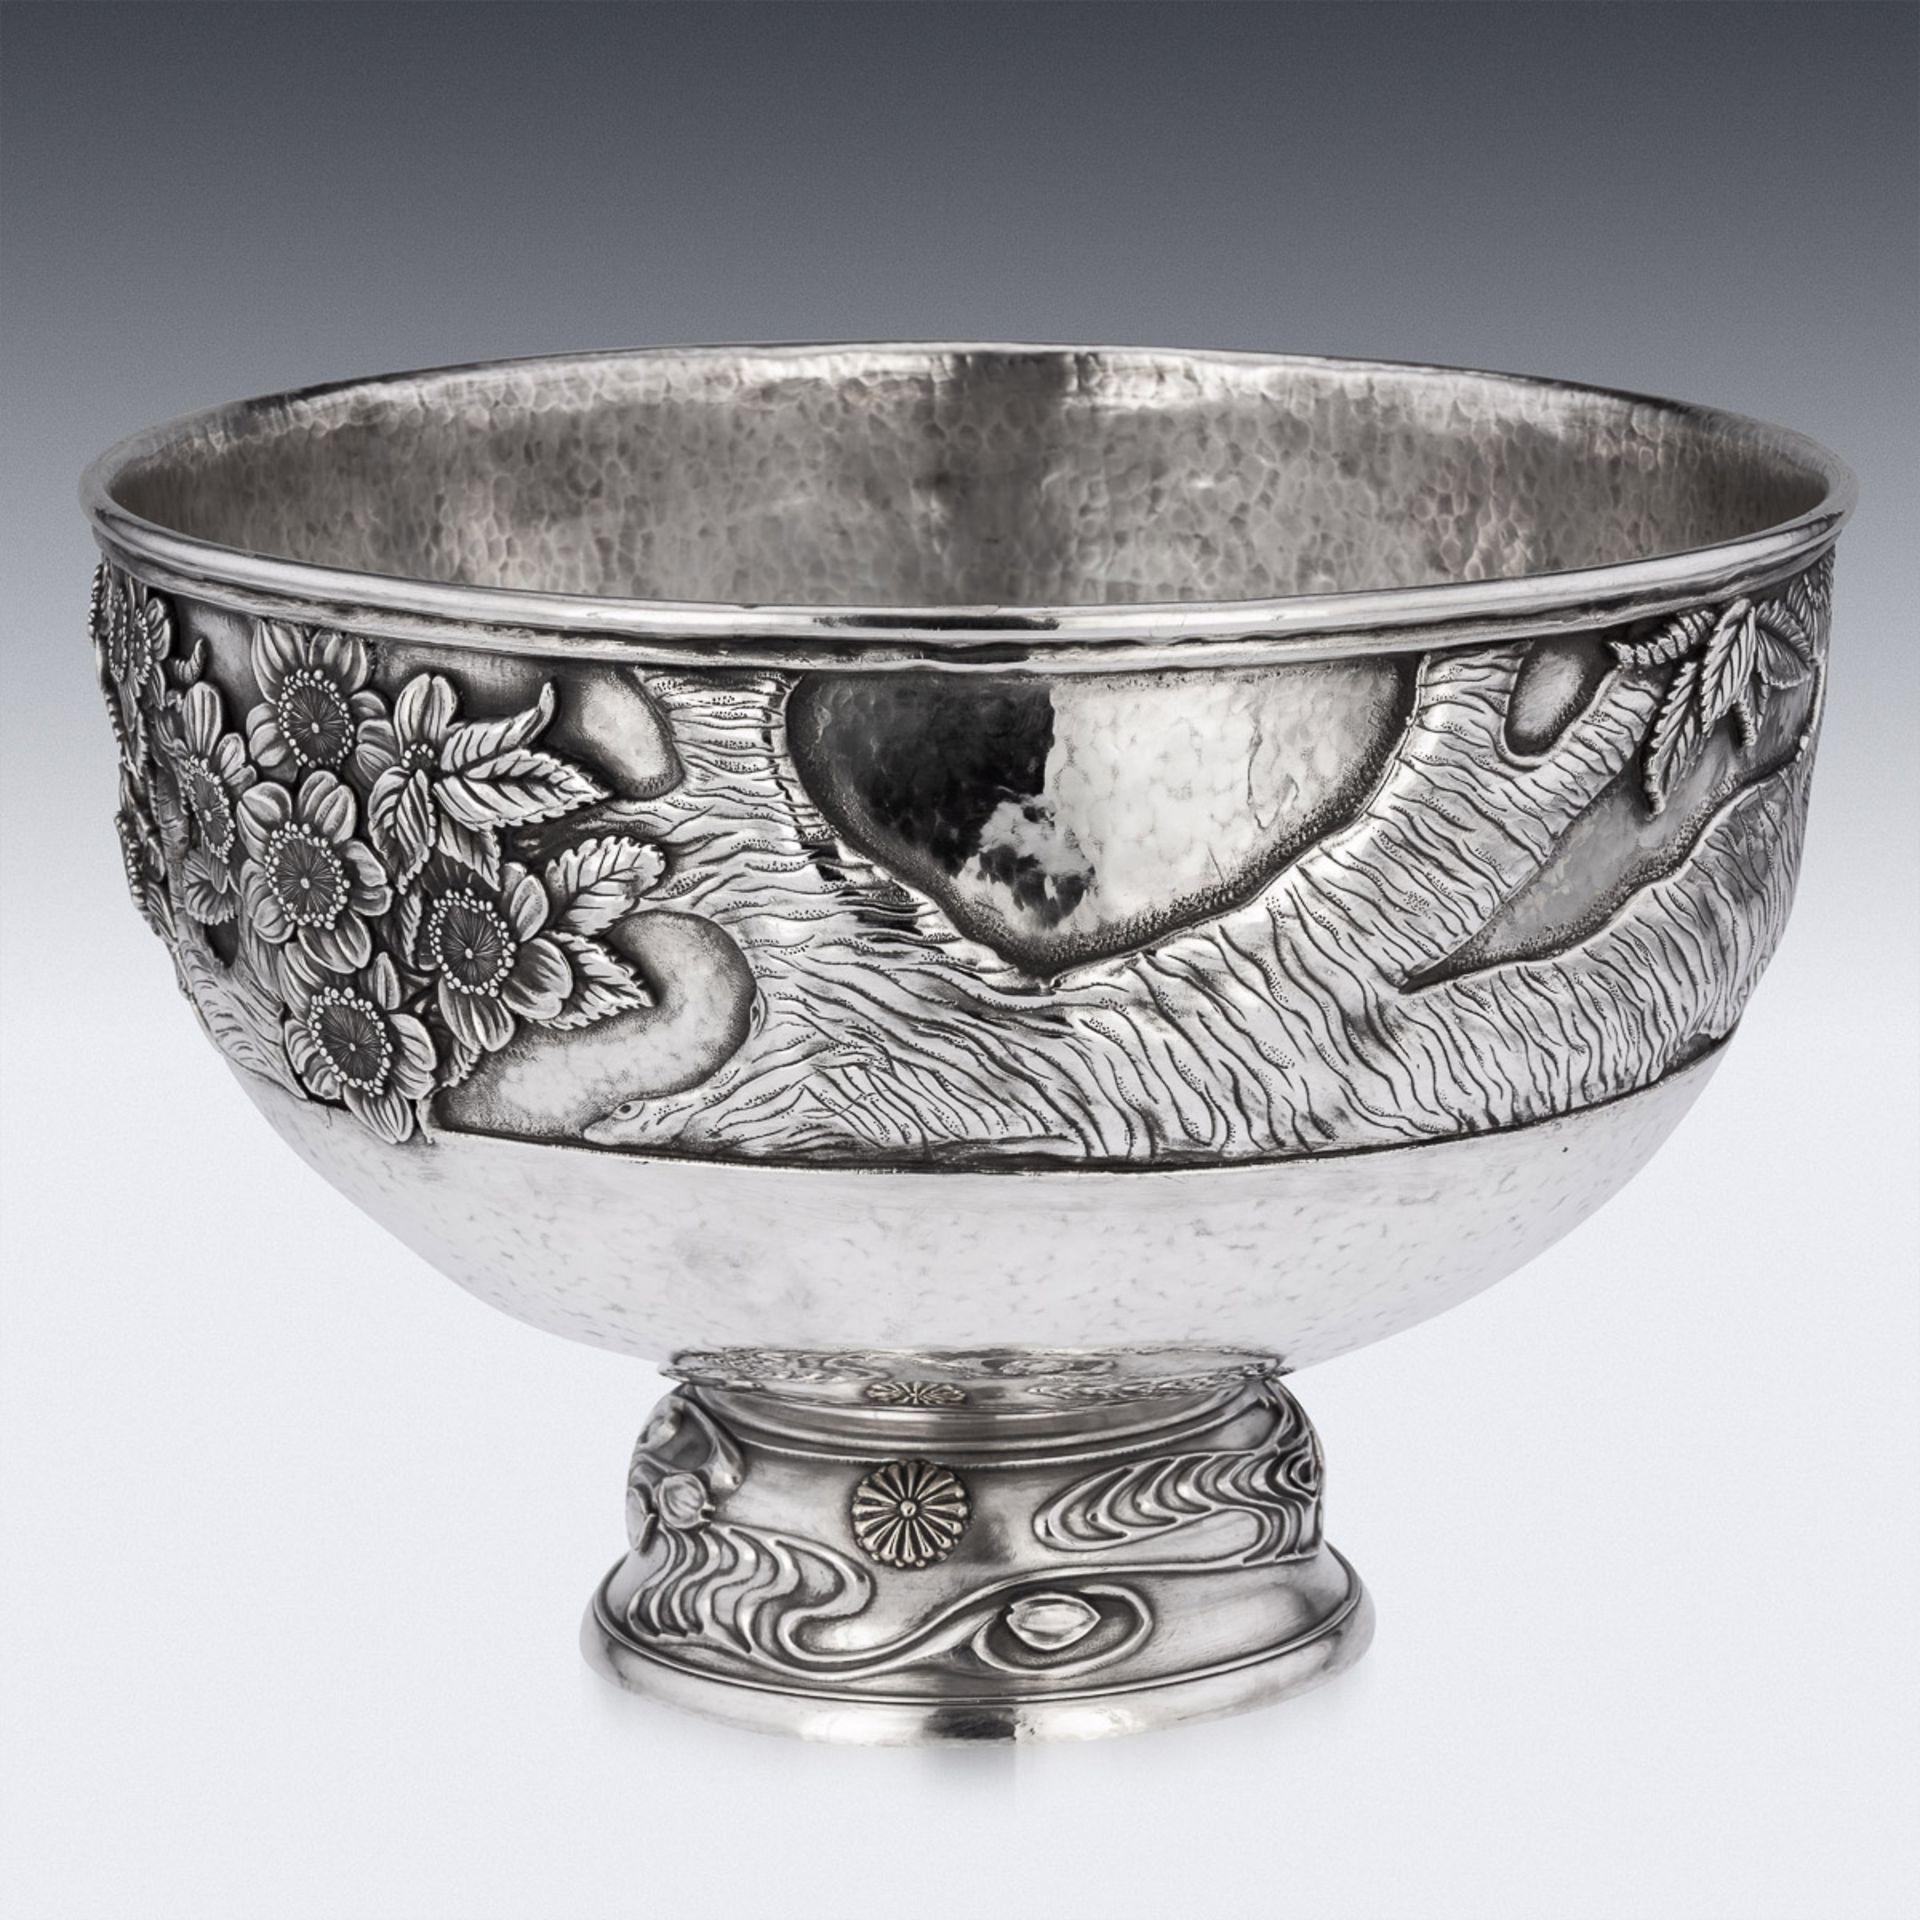 A MONUMENTAL LATE 19TH CENTURY JAPANESE SOLID SILVER BOWL C. 1900 - Image 4 of 17